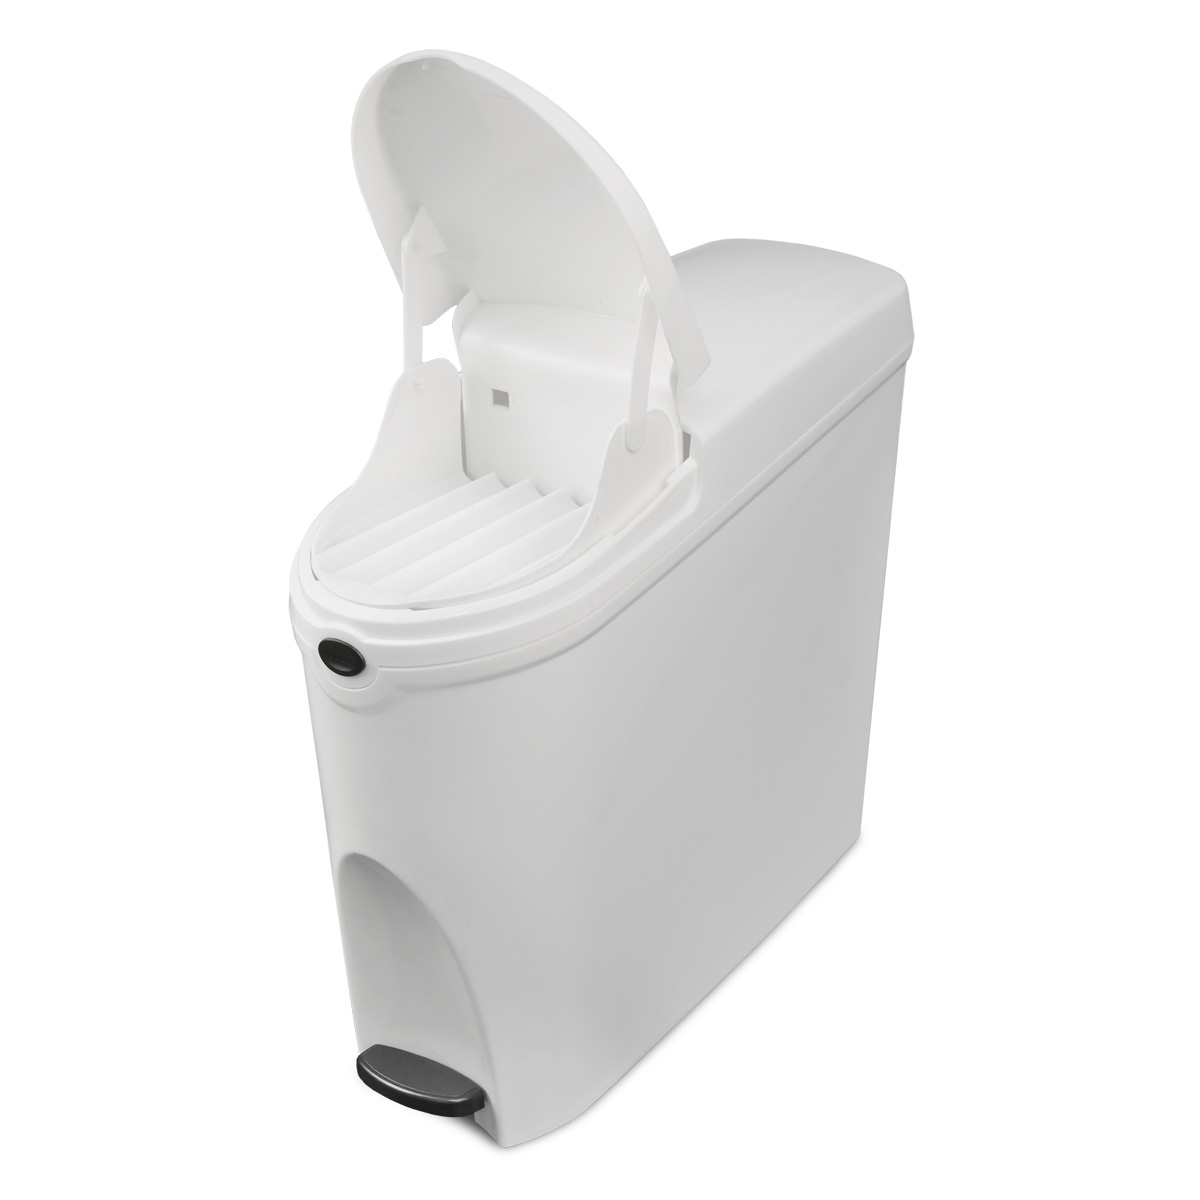 Pedal Operated Sanitary Bin 20 Litre Capacity